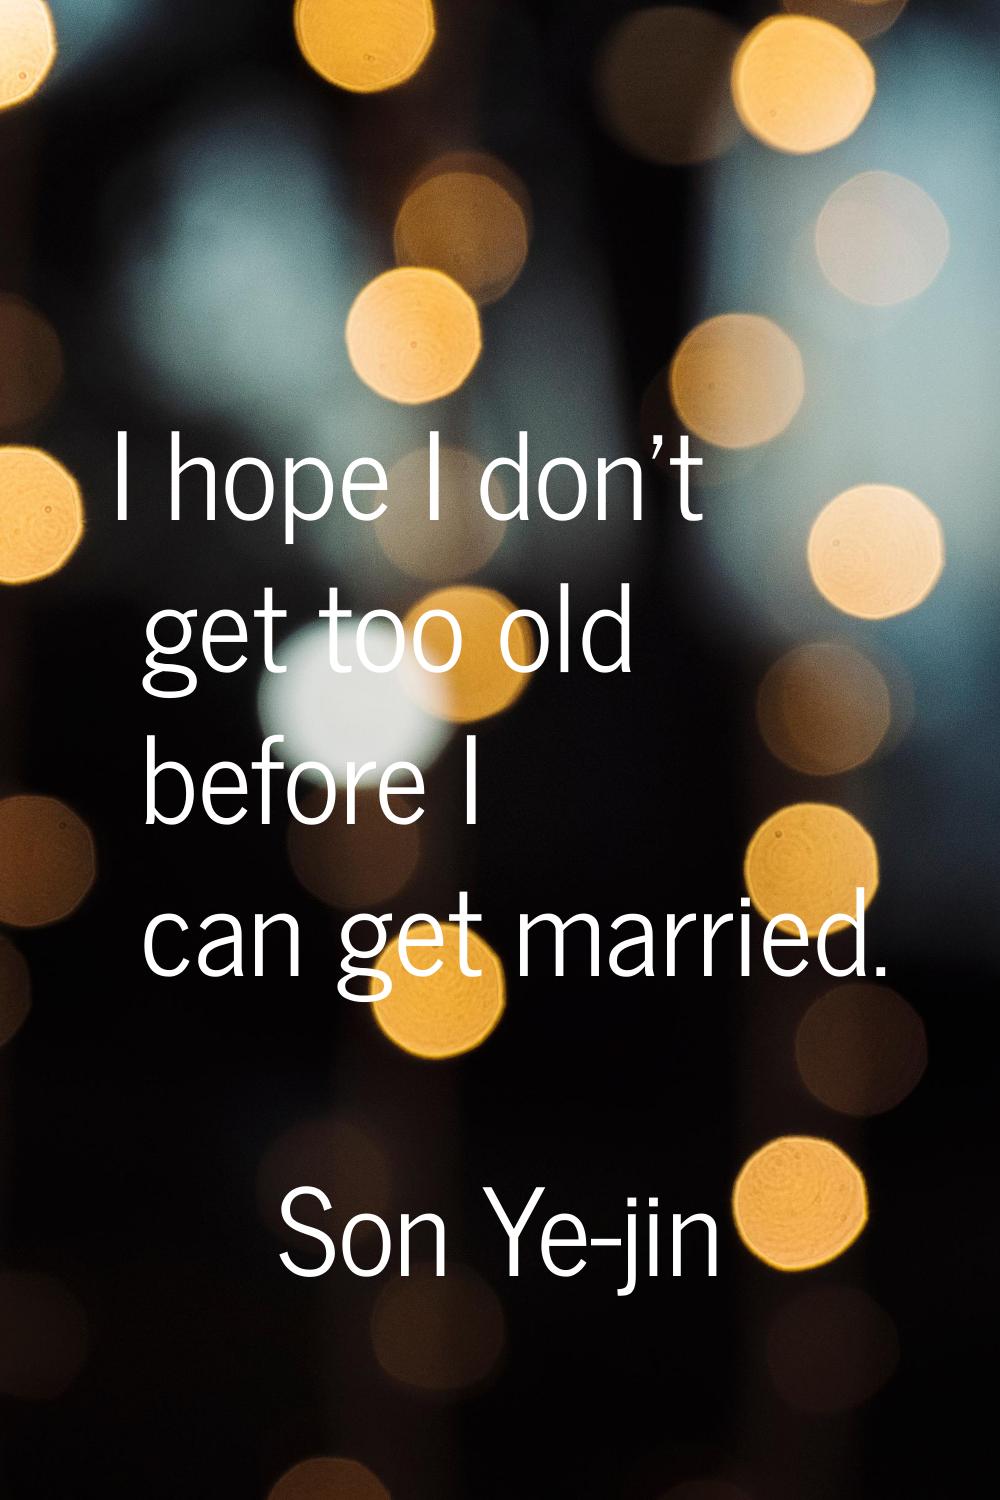 I hope I don't get too old before I can get married.